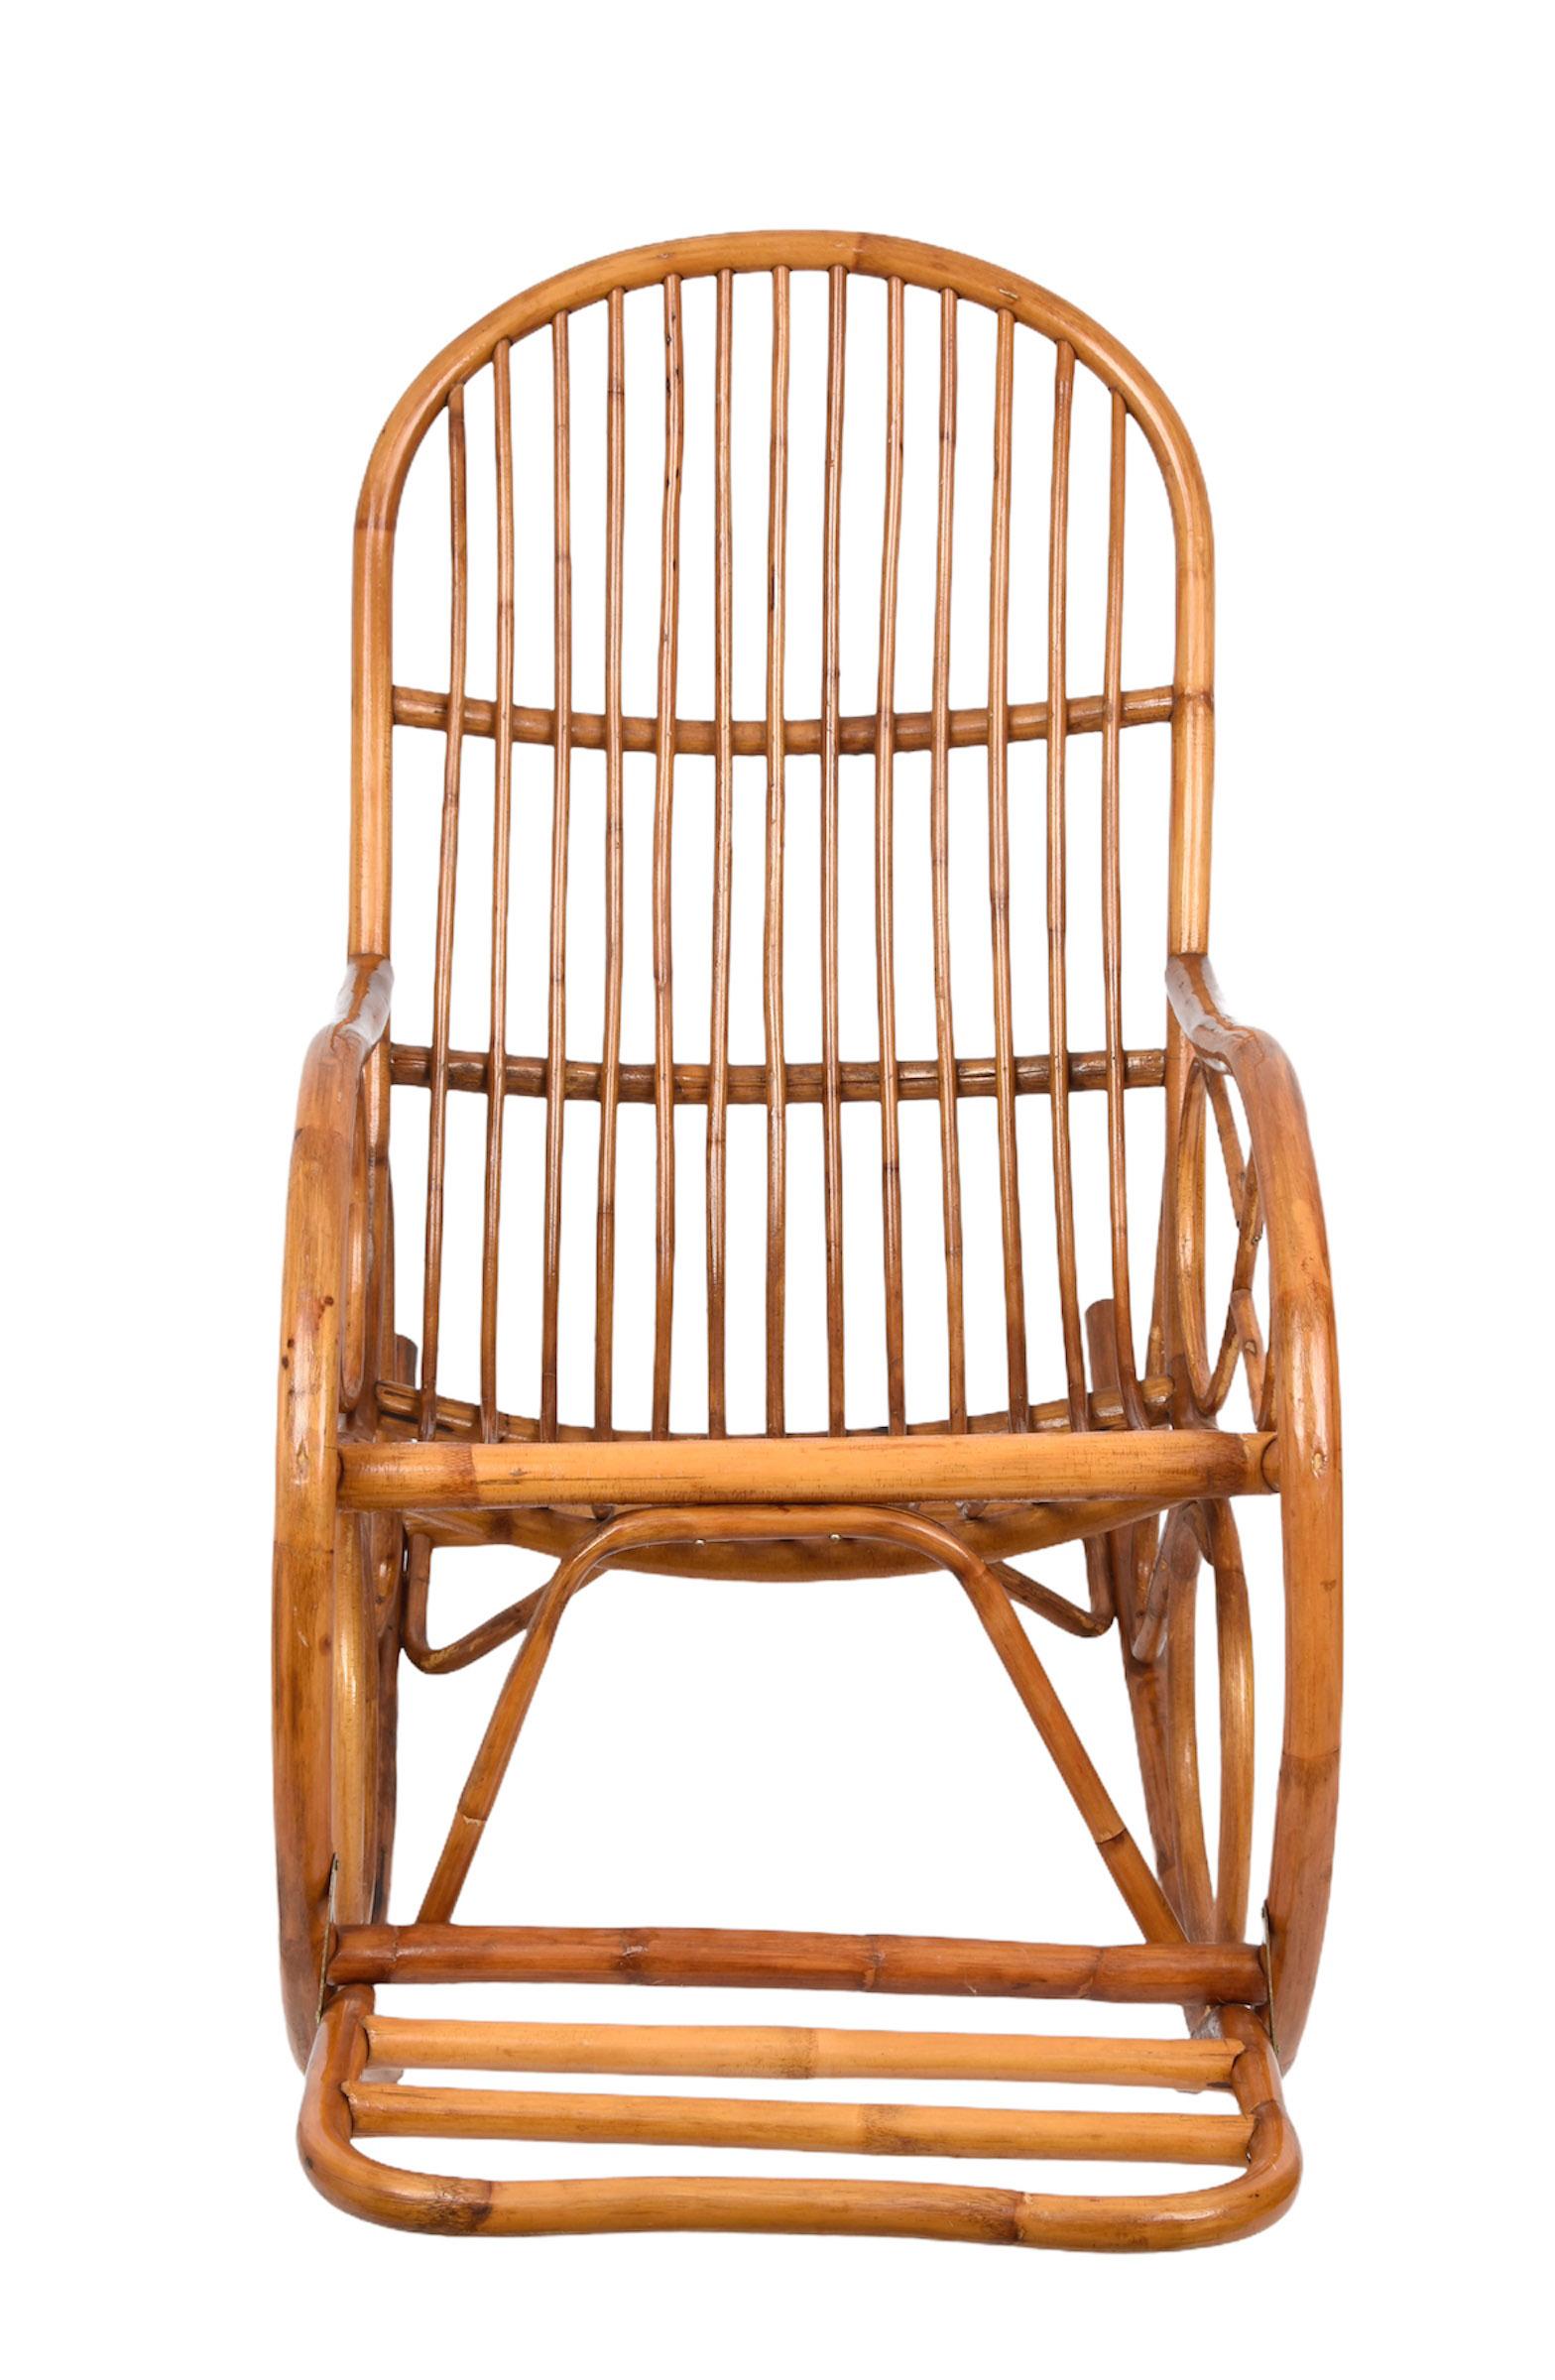 Midcentury French Riviera Rattan and Bamboo Italian Rocking Chair, 1970s For Sale 3